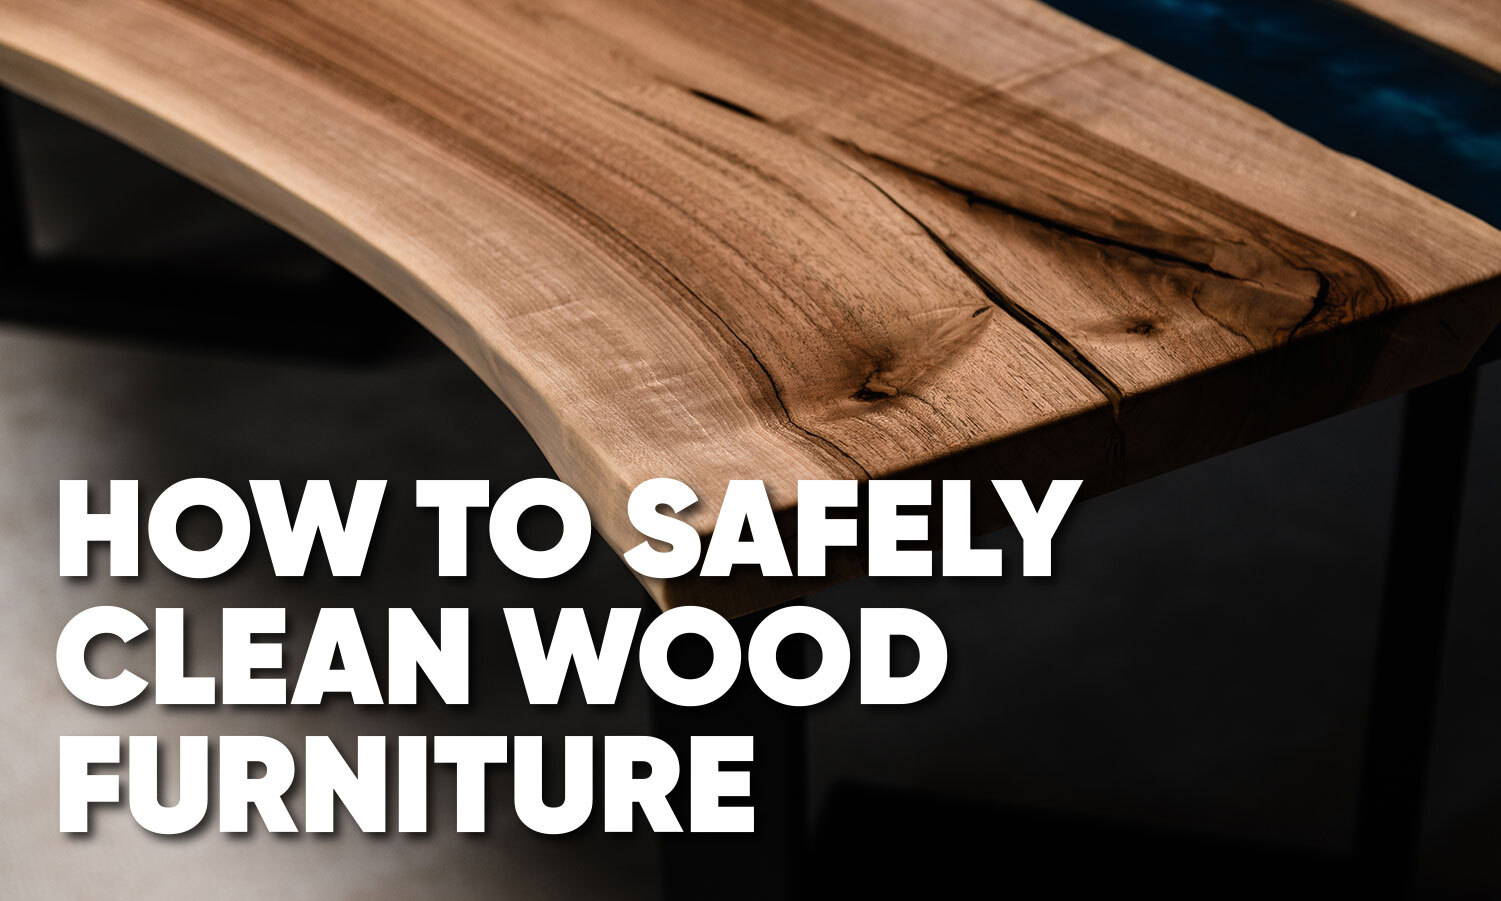 Best Way to Clean Wood Furniture, Cigarette Smoke, Mold, and Mildew